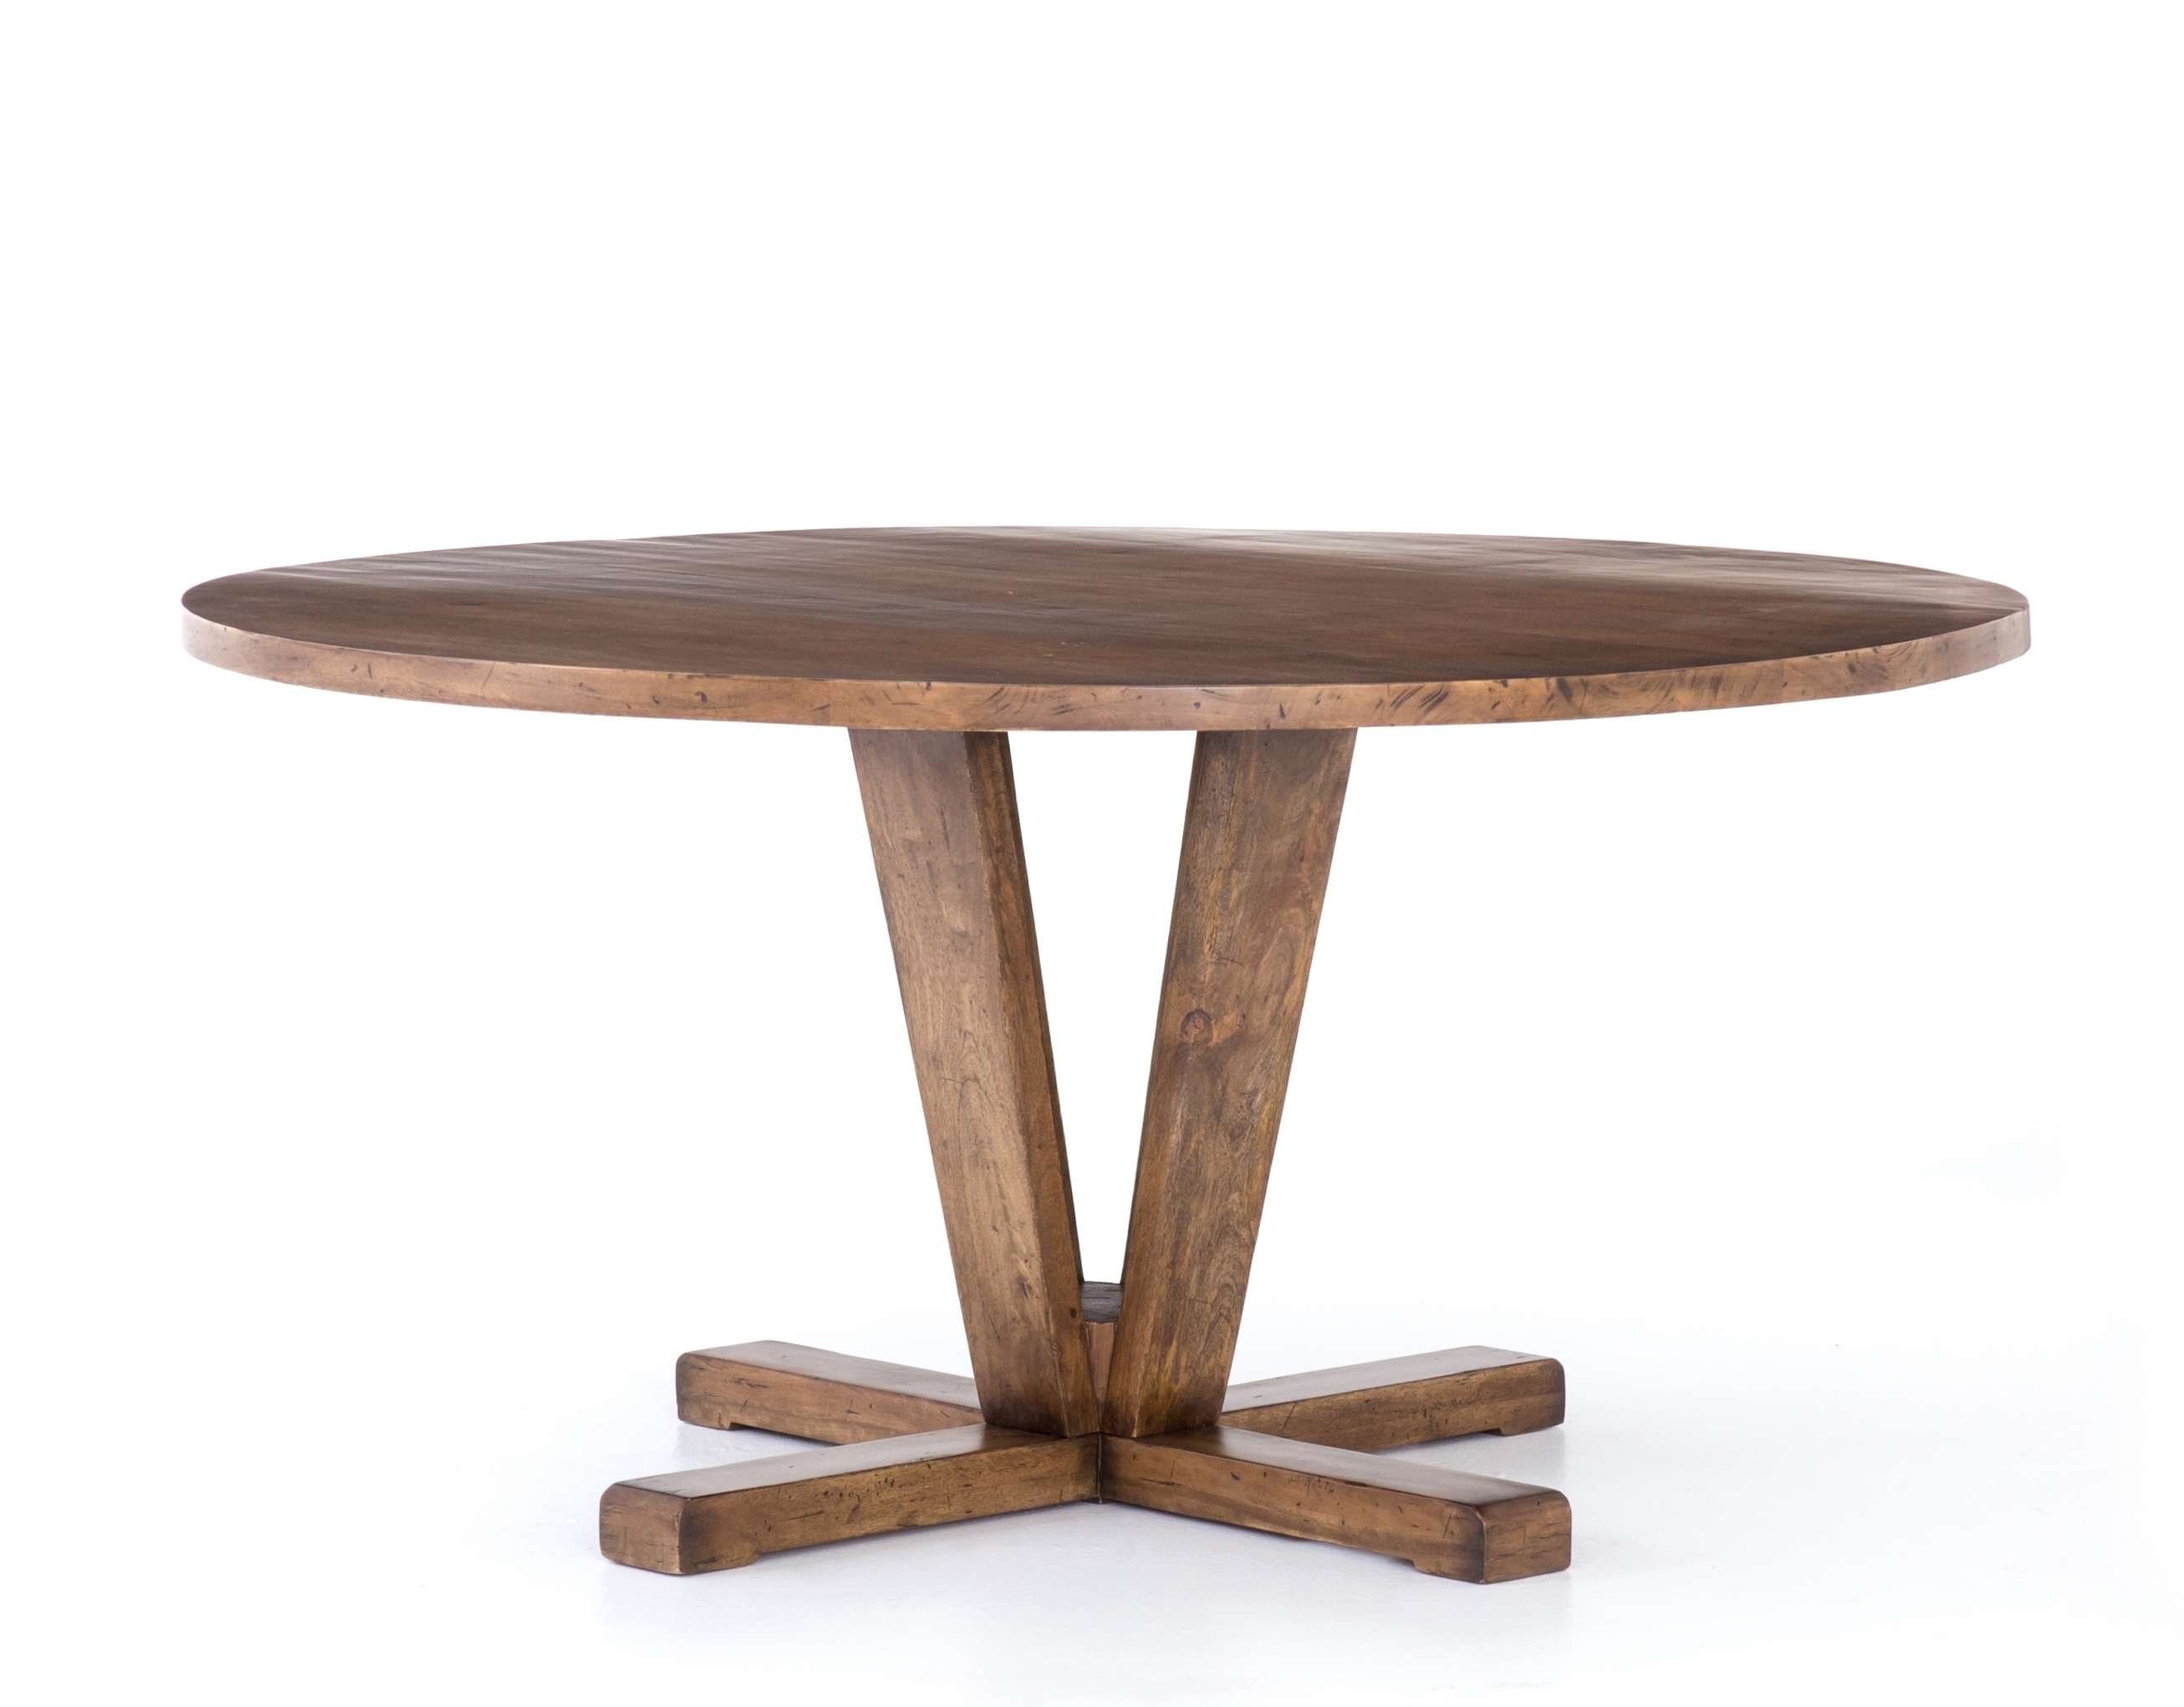 Maleva Round Dining Table, Reclaimed Wood - Image 3